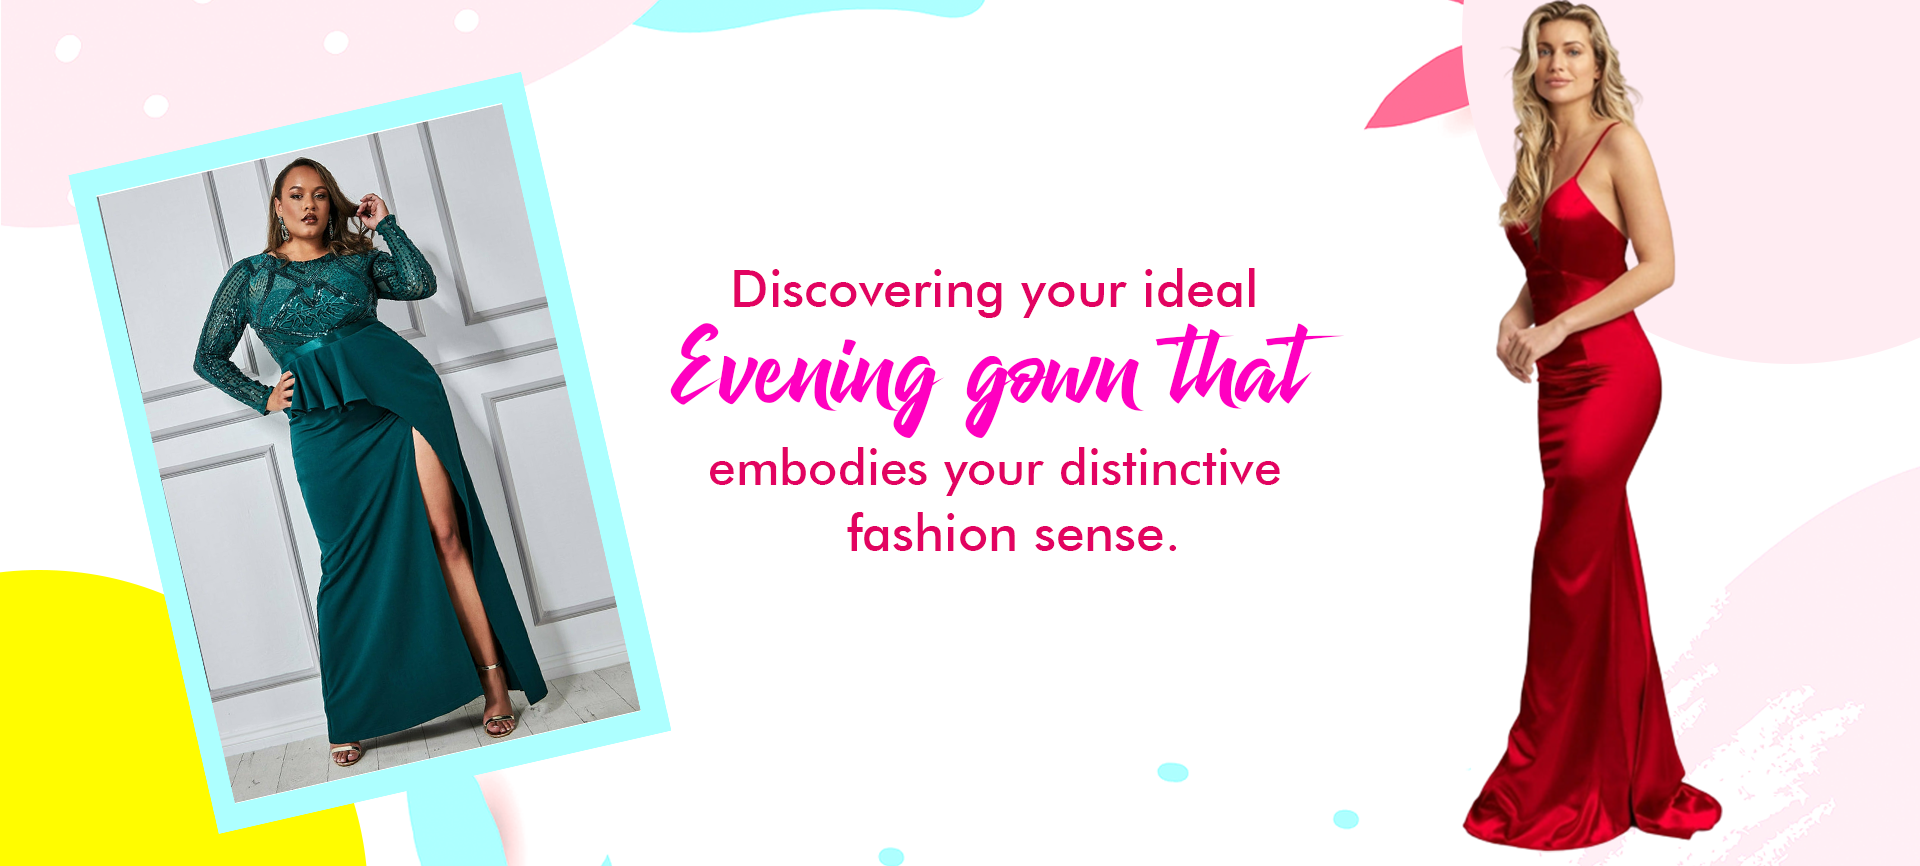 Discovering your ideal evening gown that embodies your distinctive fashion sense.